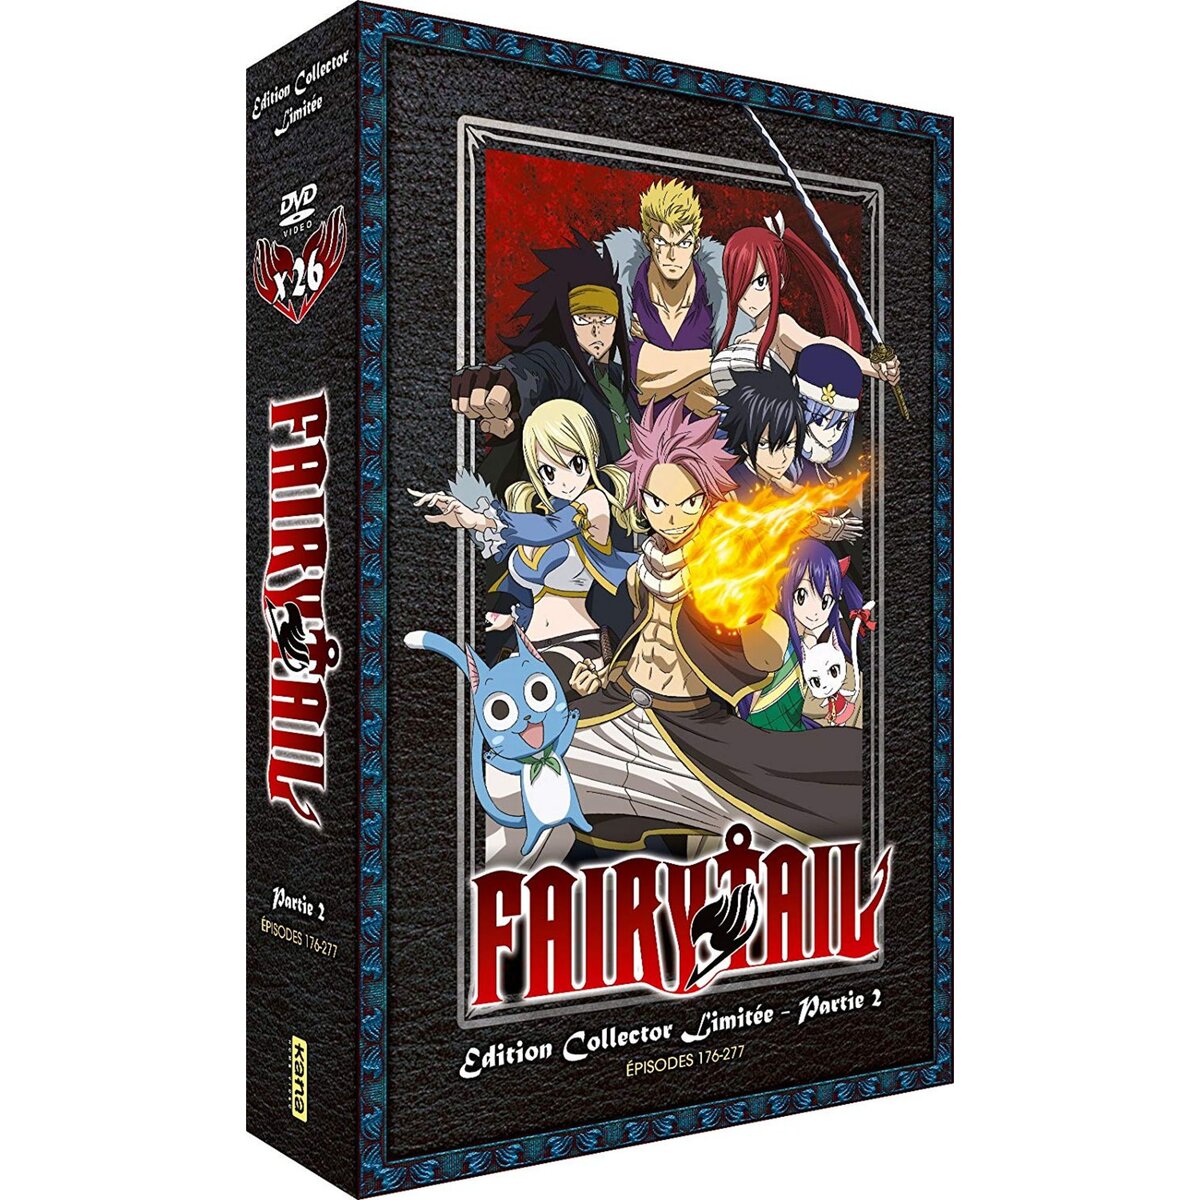 FAIRY TAIL PARTIE 2 - DVD NOUVELLE EDITION COLLECTOR